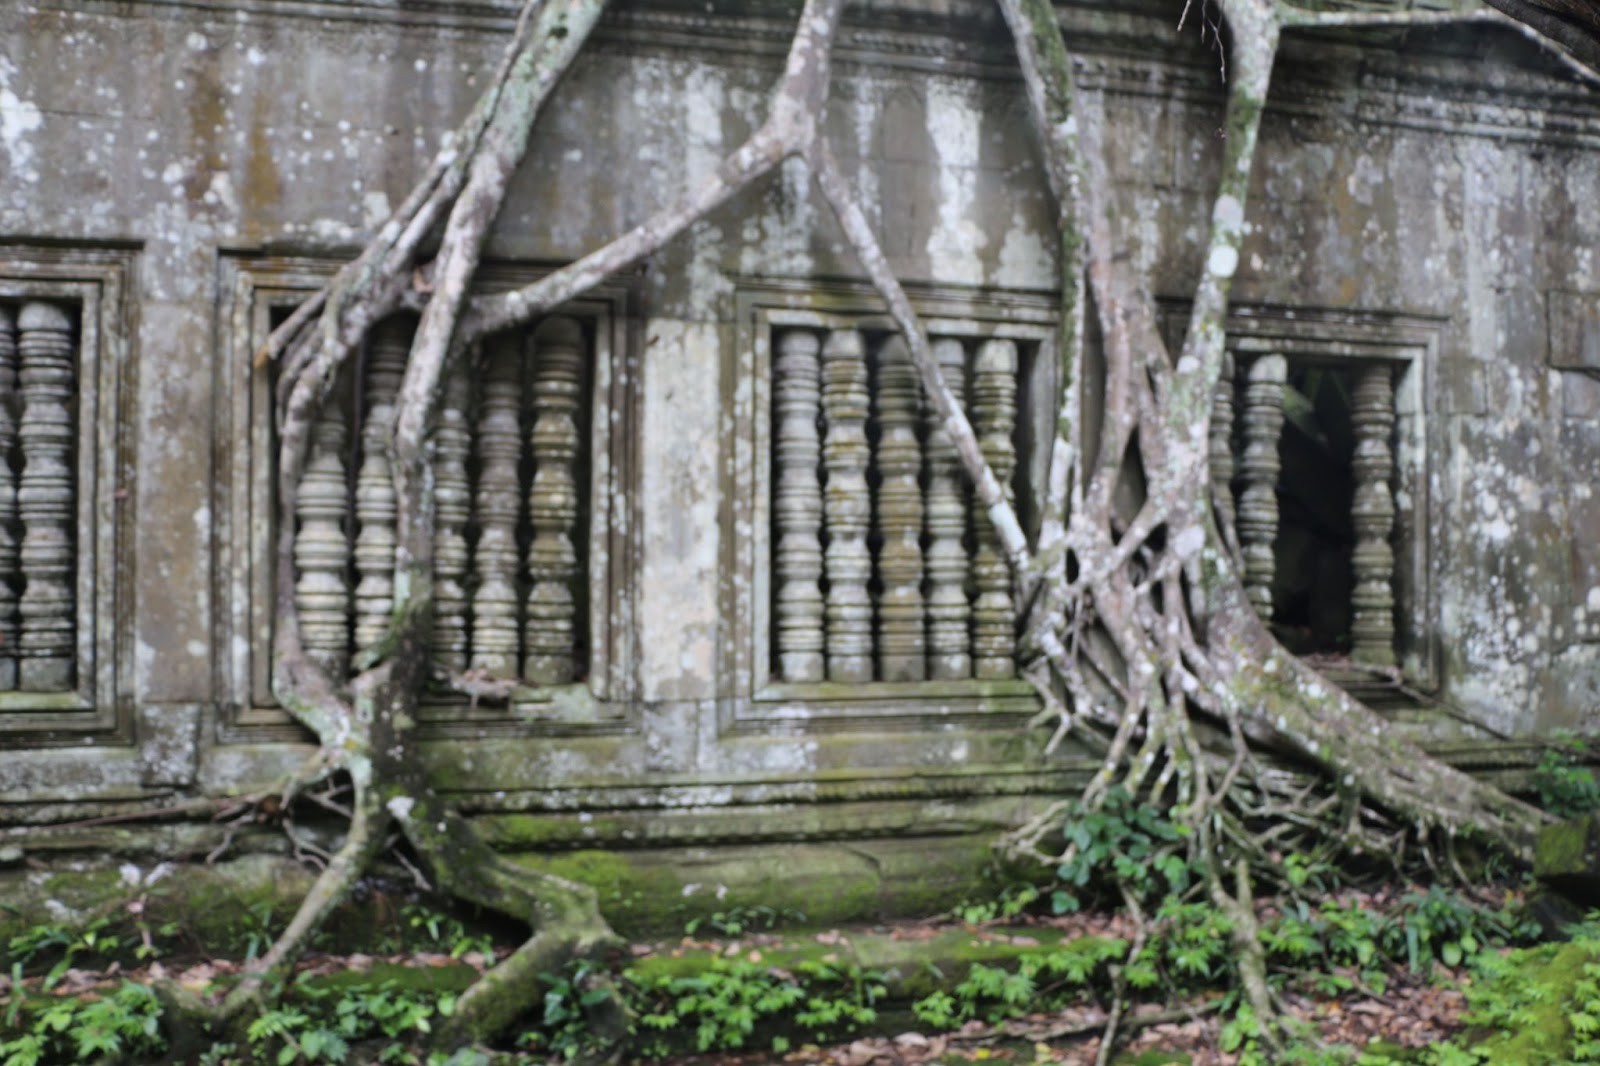 Beng Melea is an authentic and more satisfying jungle temple.